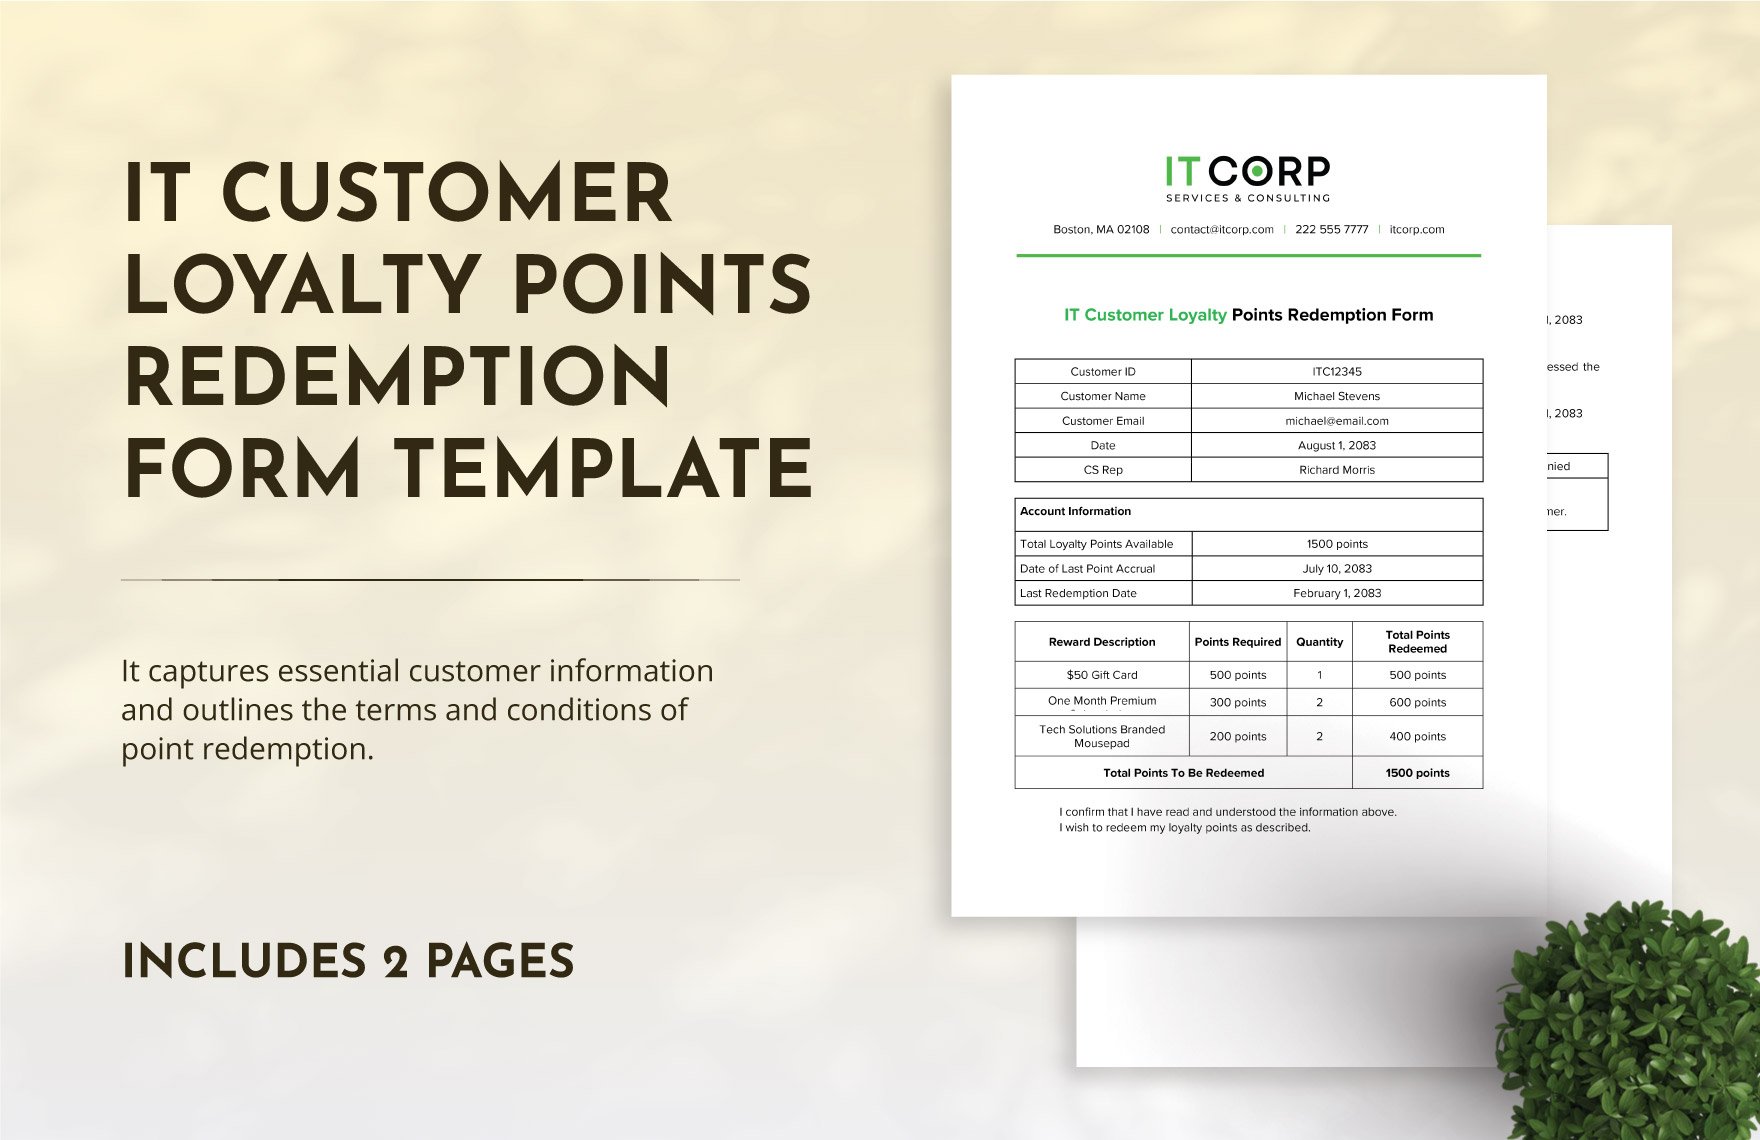 IT Customer Loyalty Points Redemption Form Template in Word, Google Docs, PDF